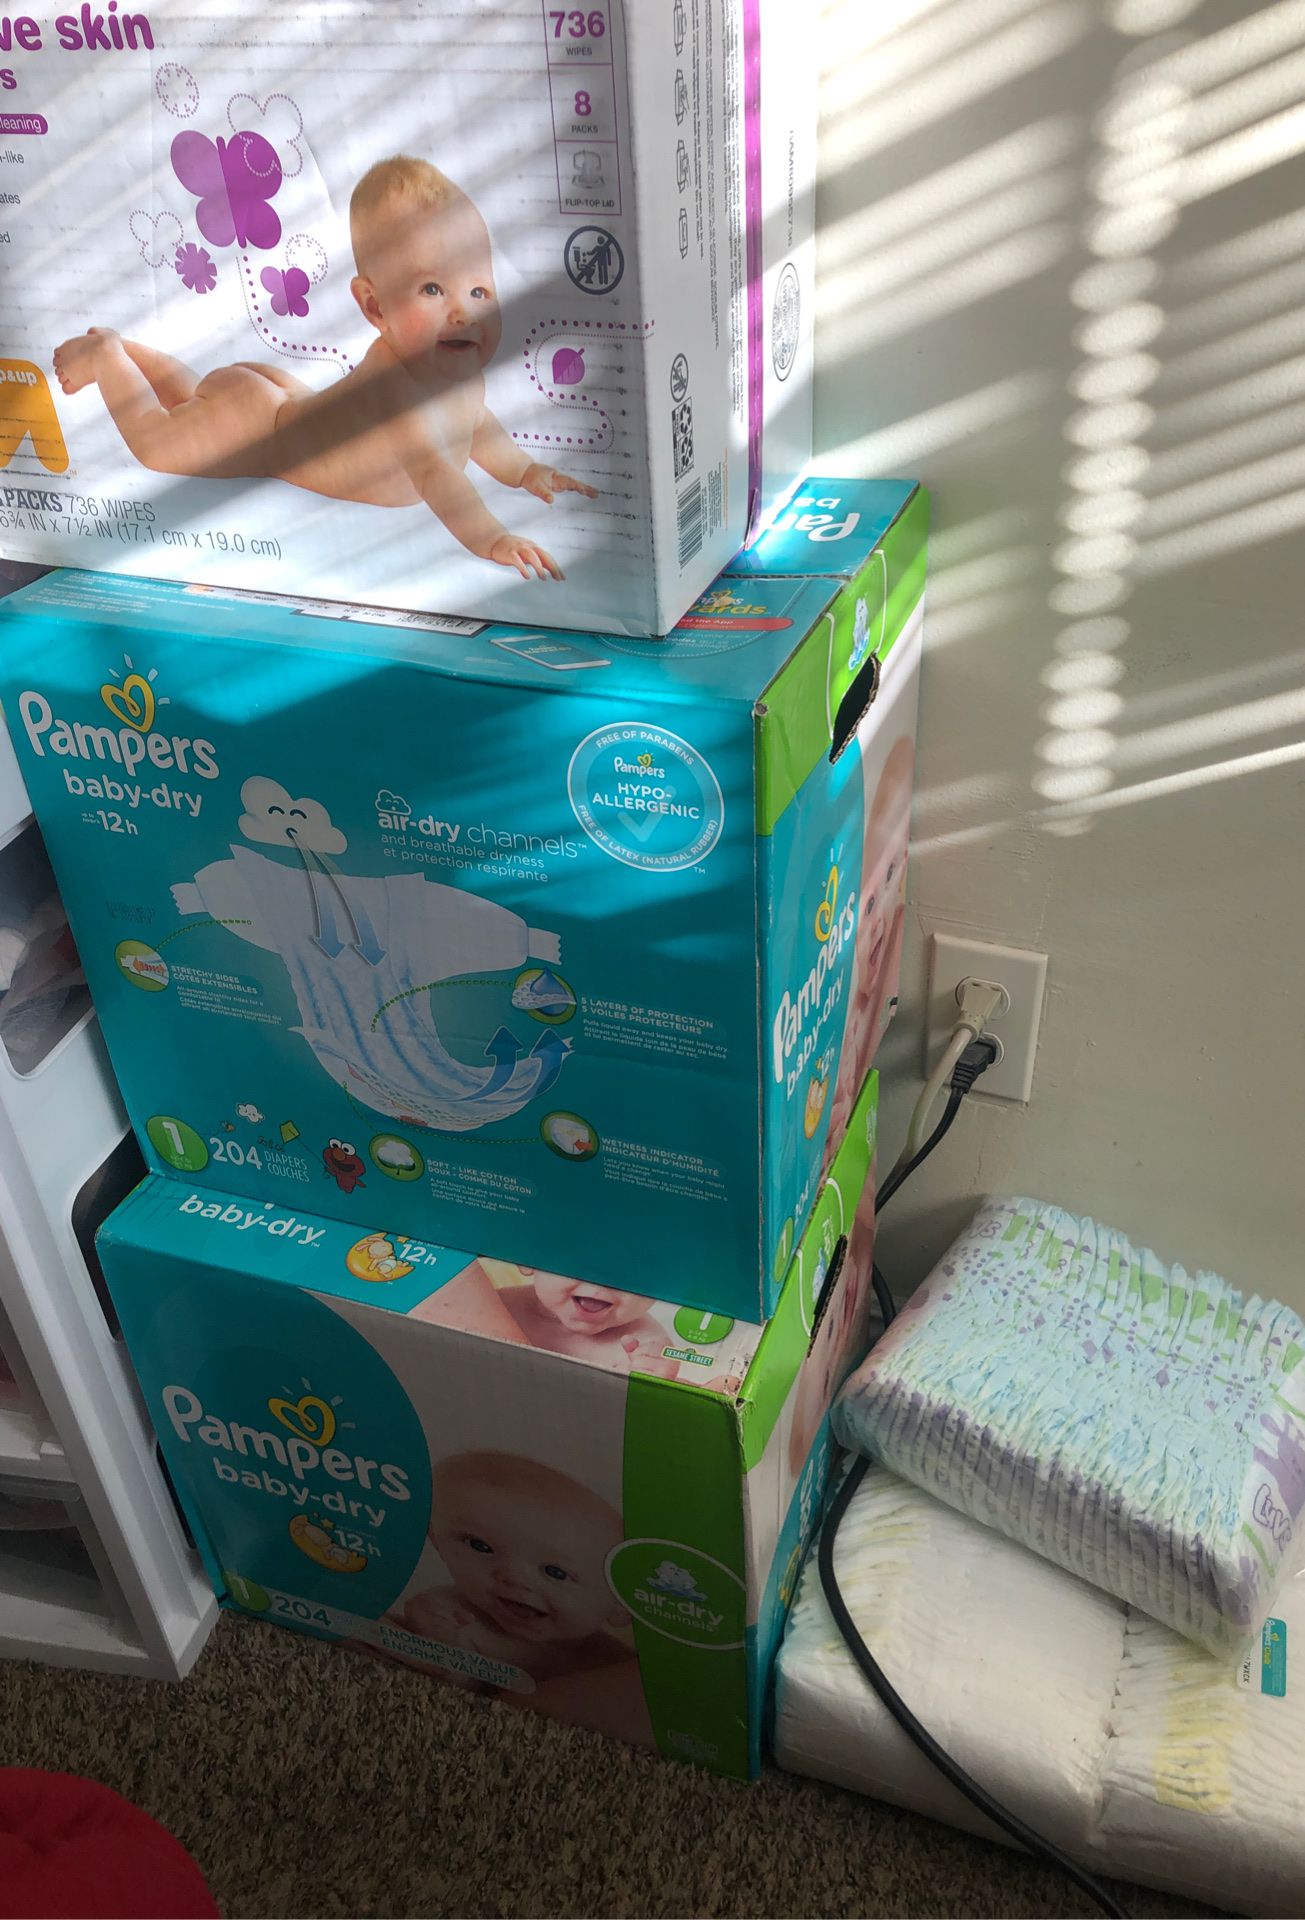 Pampers baby dry & Wipes sensitive